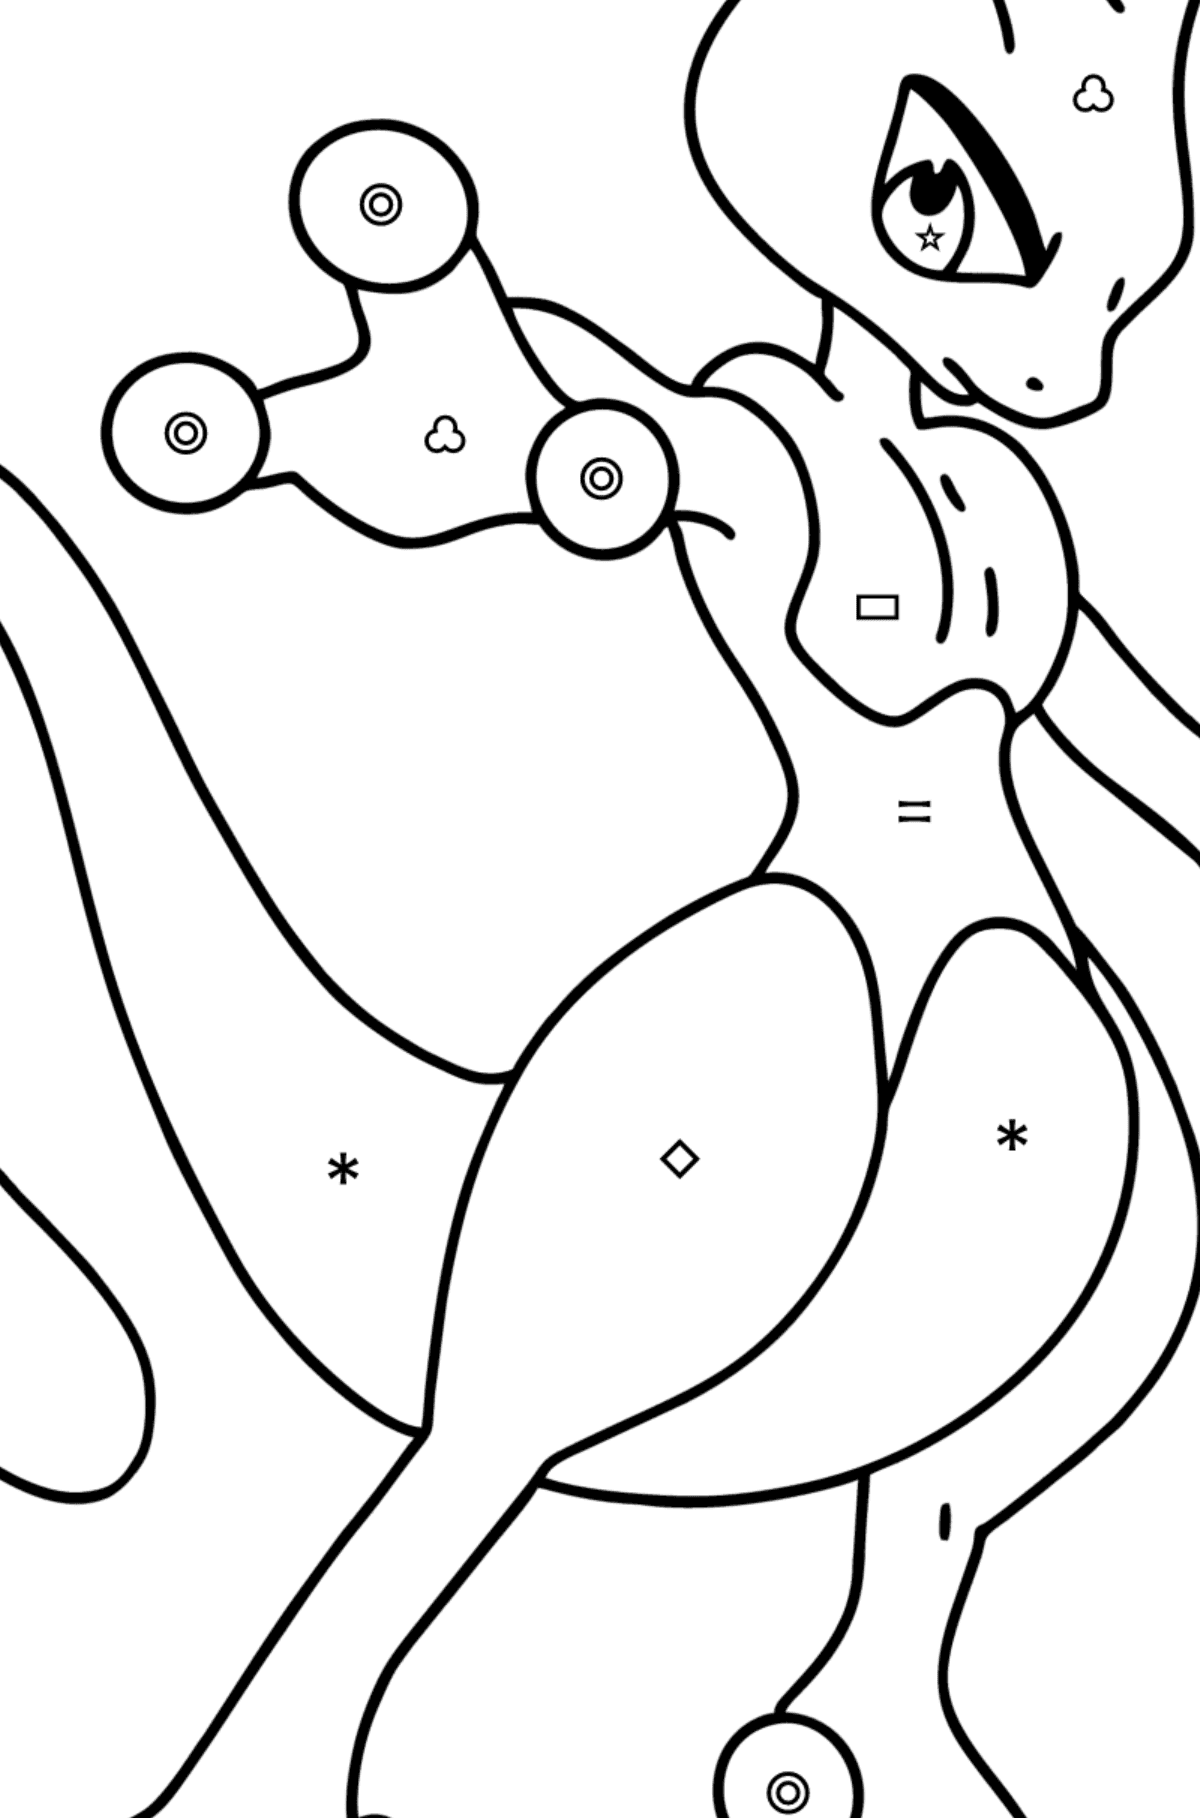 Coloring page Pokemon Go Mewtwo - Coloring by Symbols and Geometric Shapes for Kids